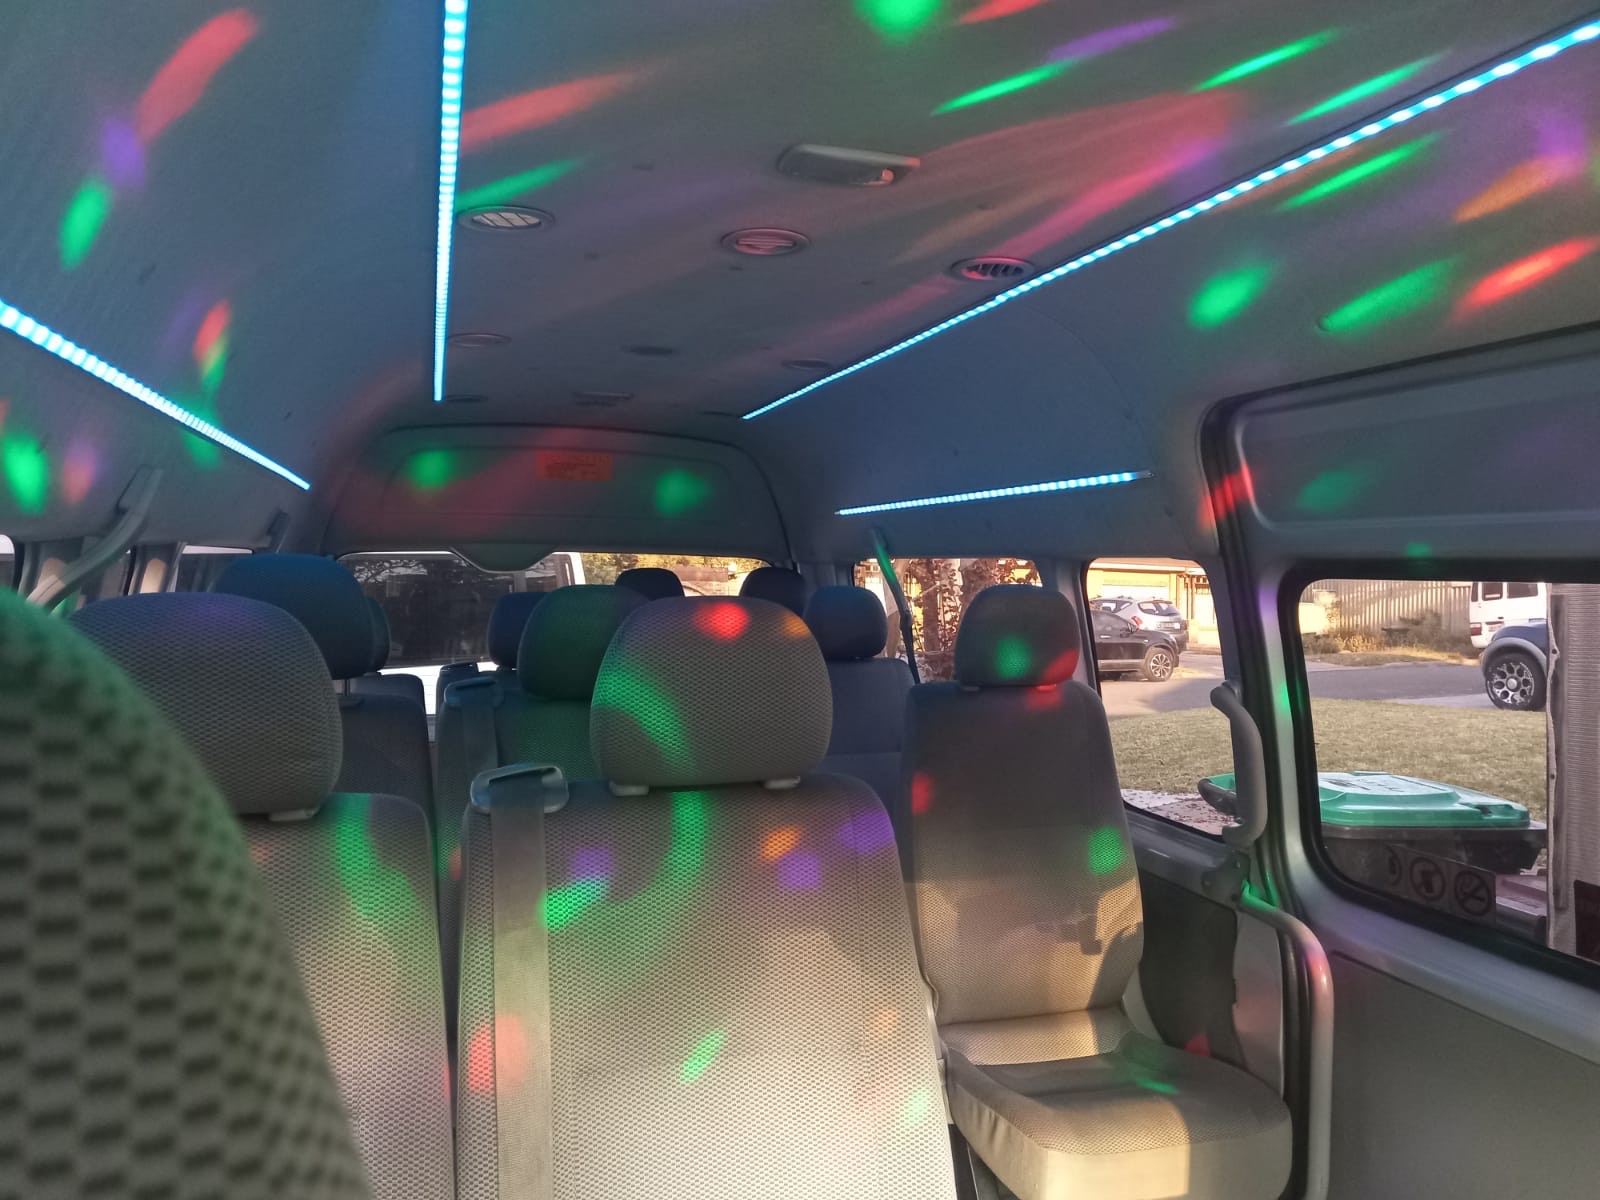 11-13 Seater Party Bus